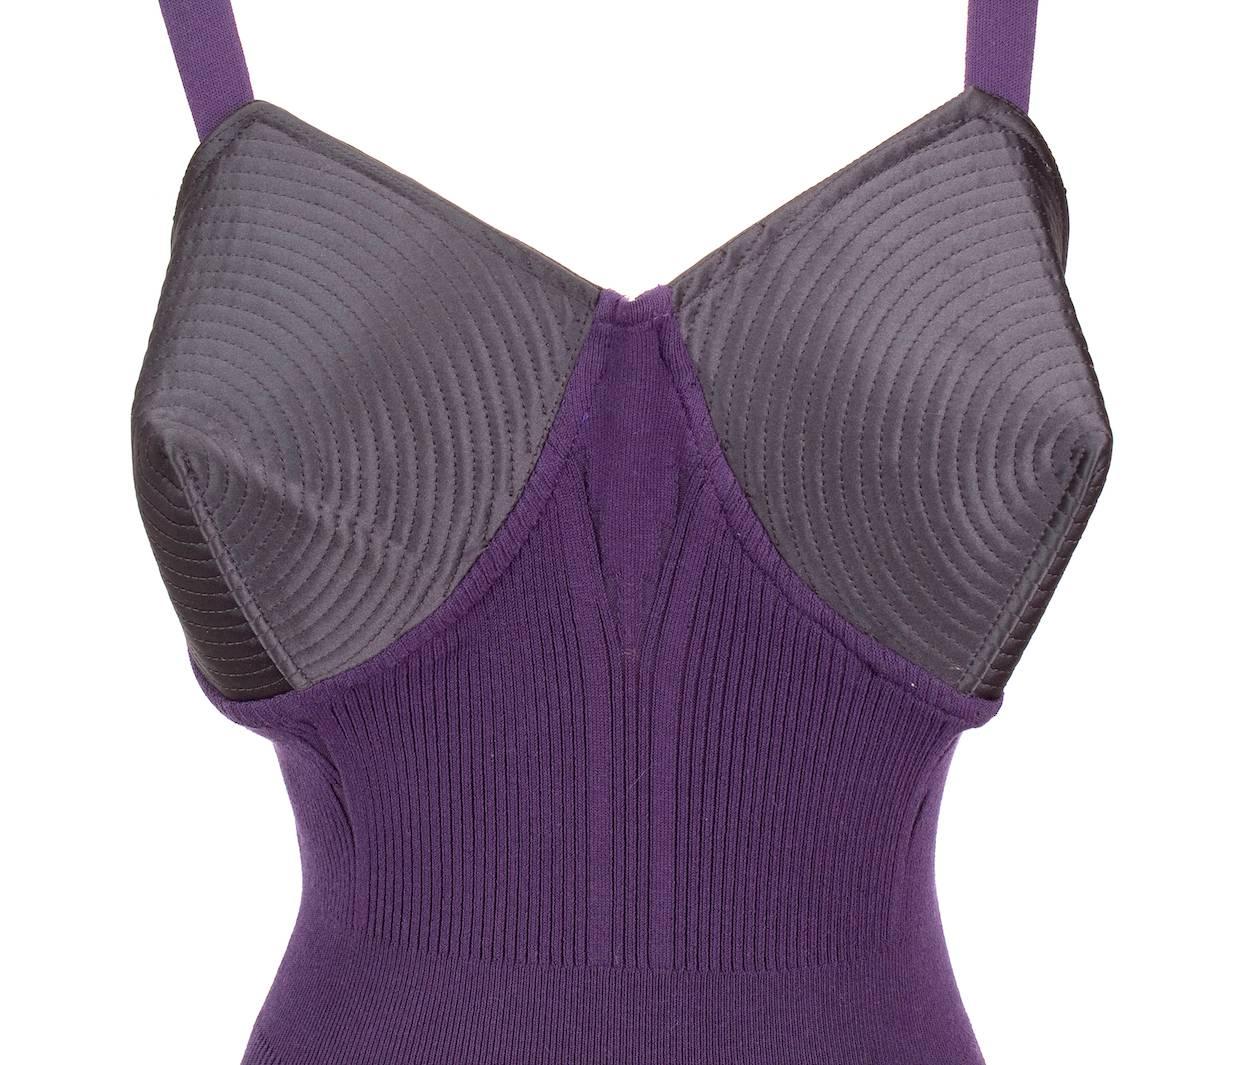 Women's Jean Paul Gaultier Knit Tank with Cone Bra circa late 1980s/early 1990s